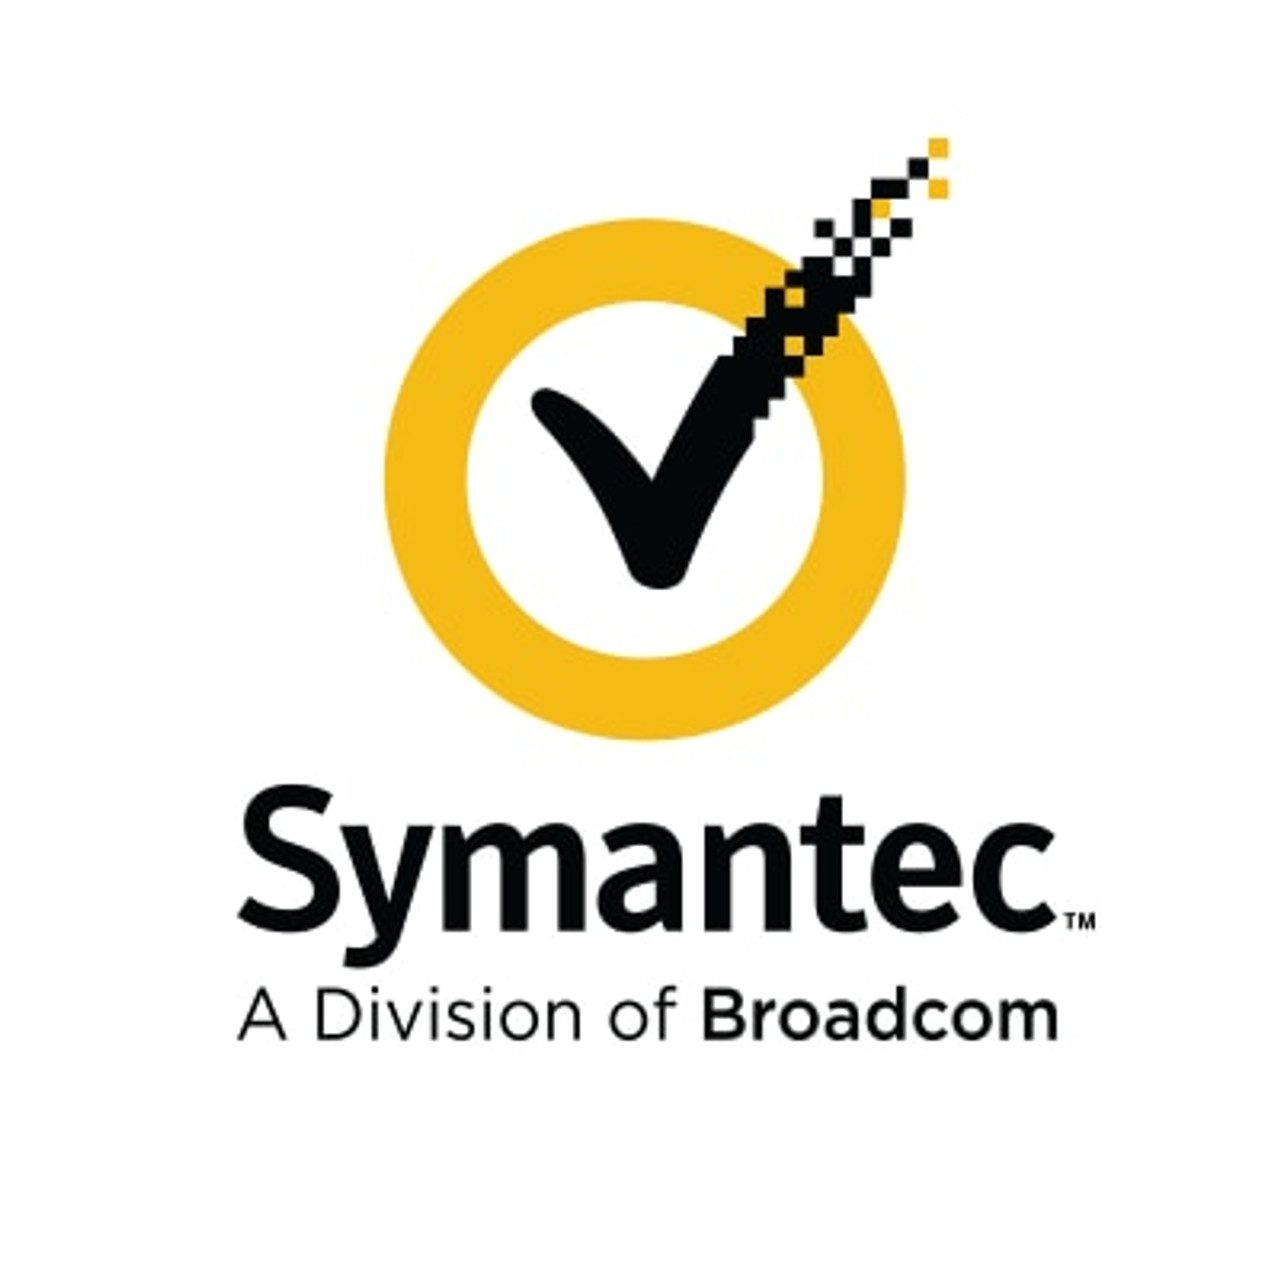 Symantec Complete Endpoint Defense (without SEP), Additional Quantity Hybrid Subscription License with Support, 100-249 Devices 1 YR